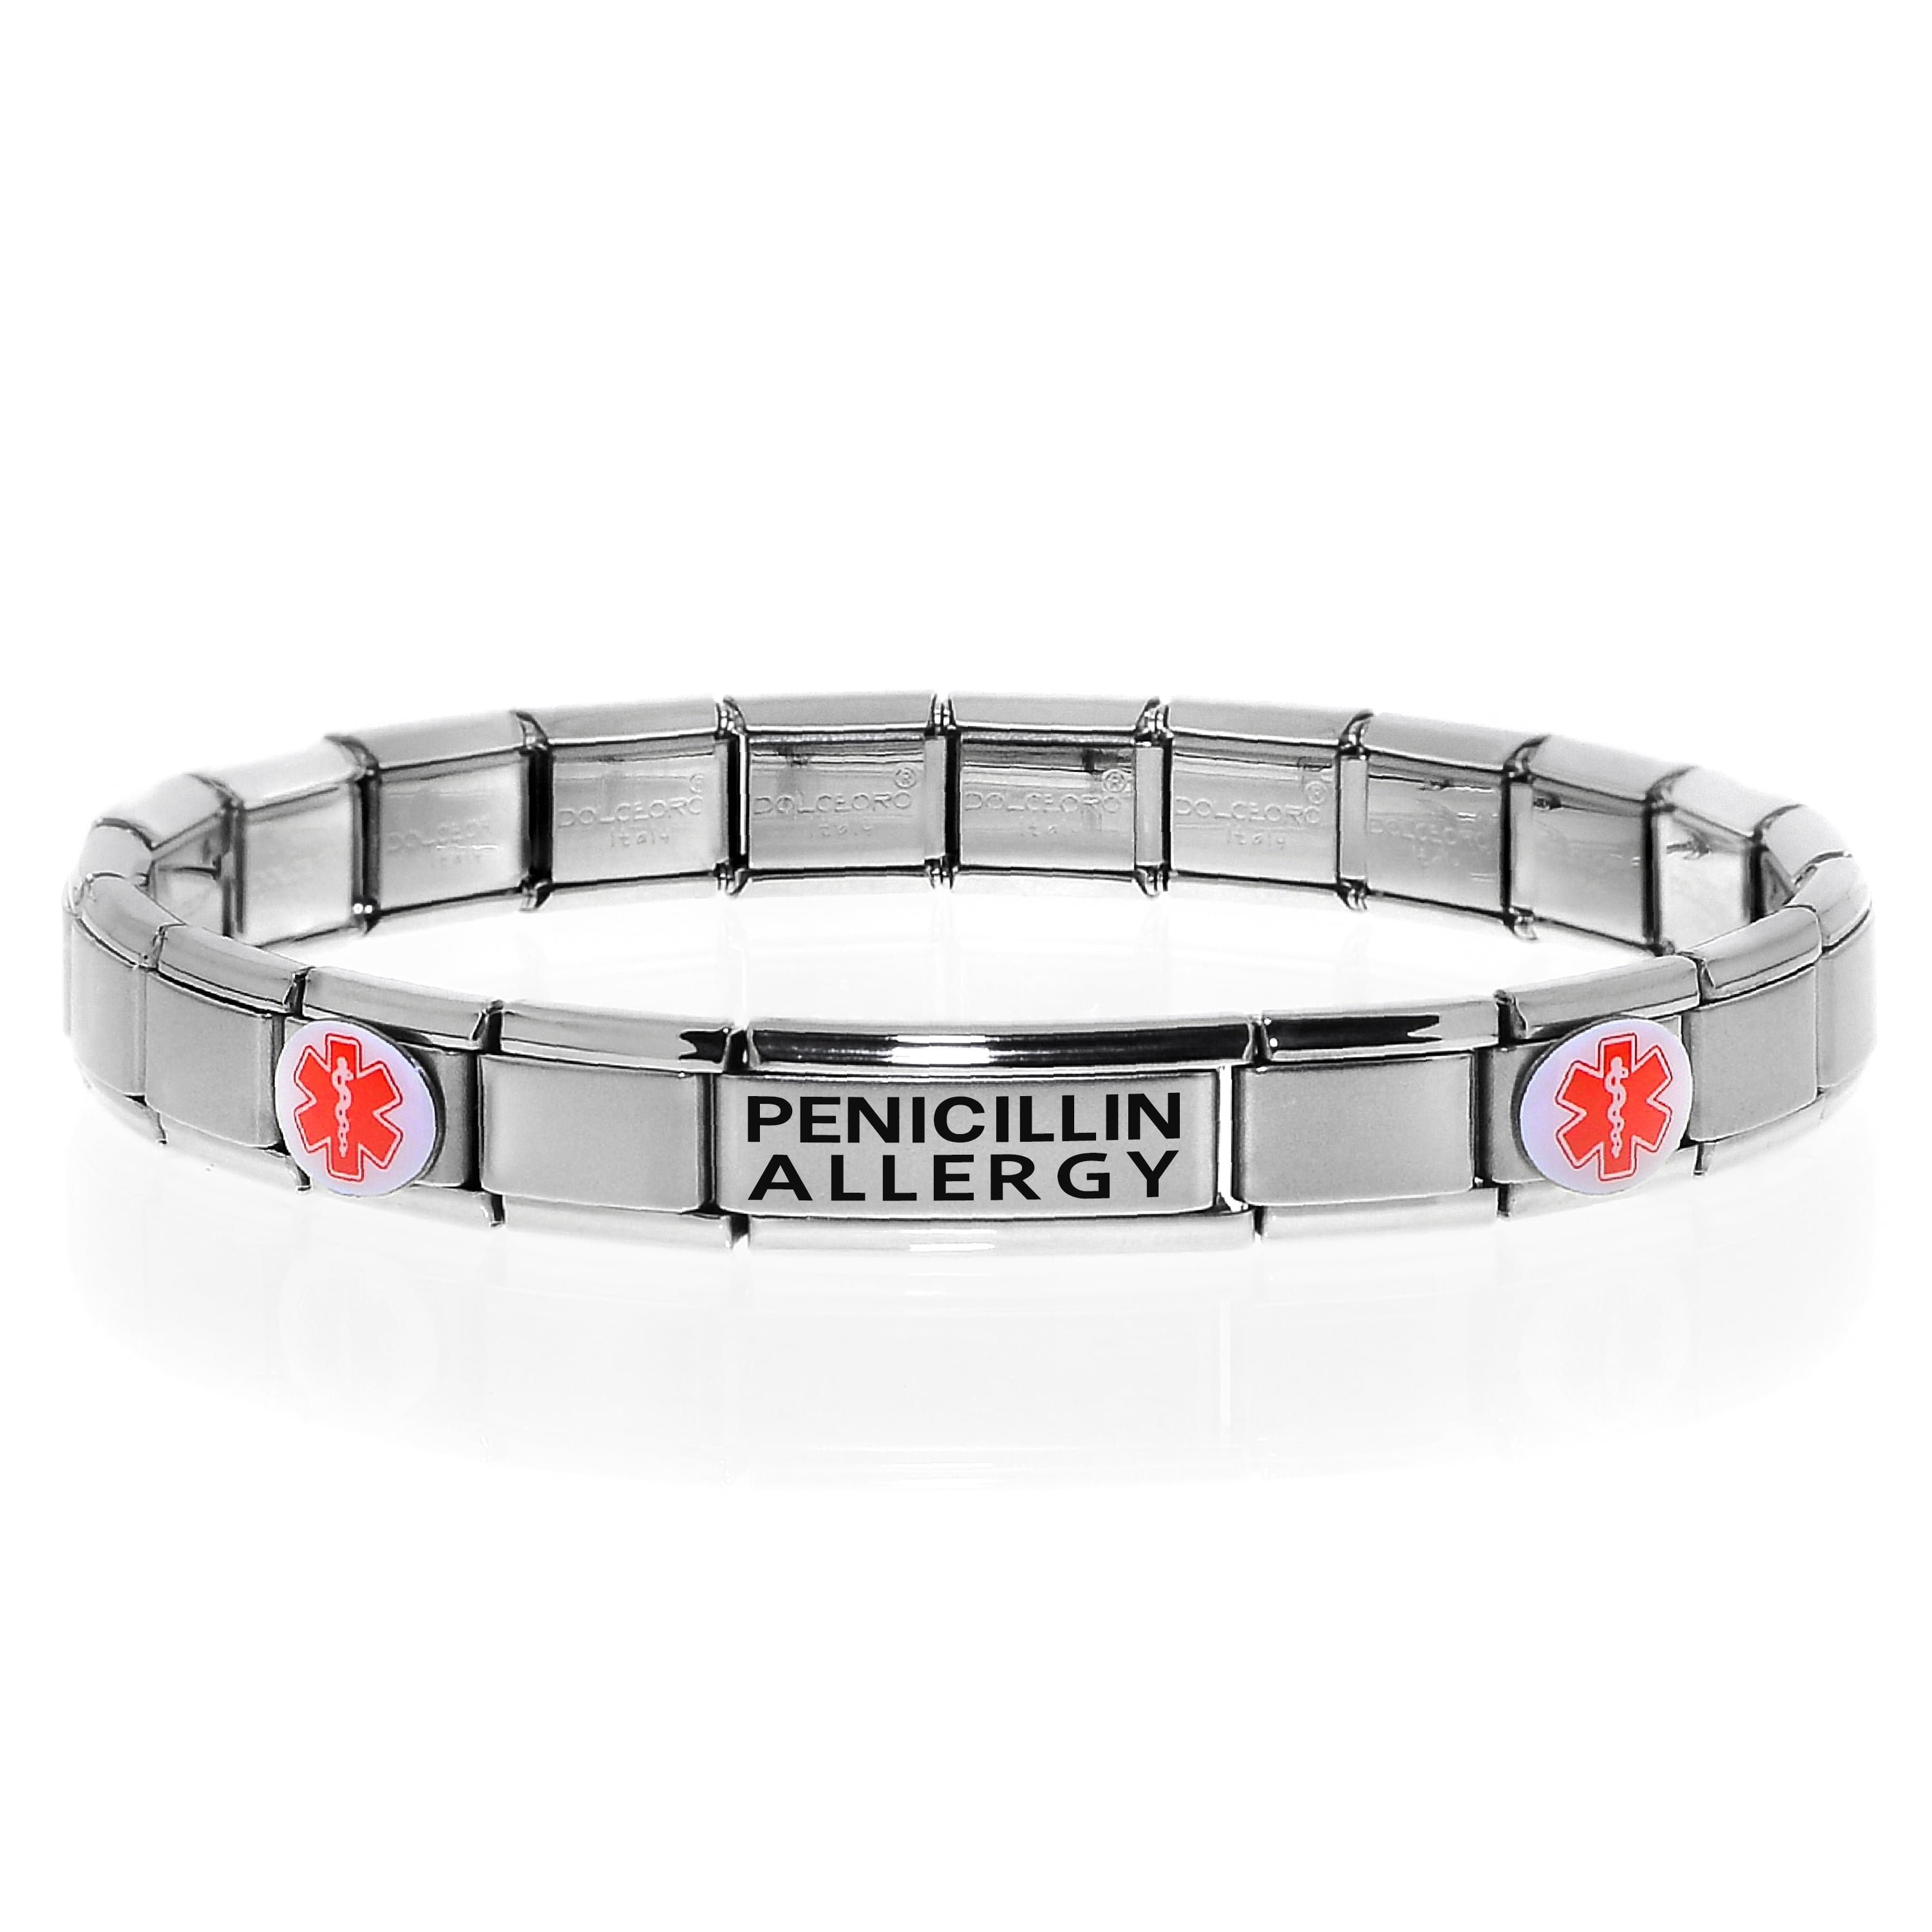 Make your own food allergy alert bracelets! * Moms and Crafters